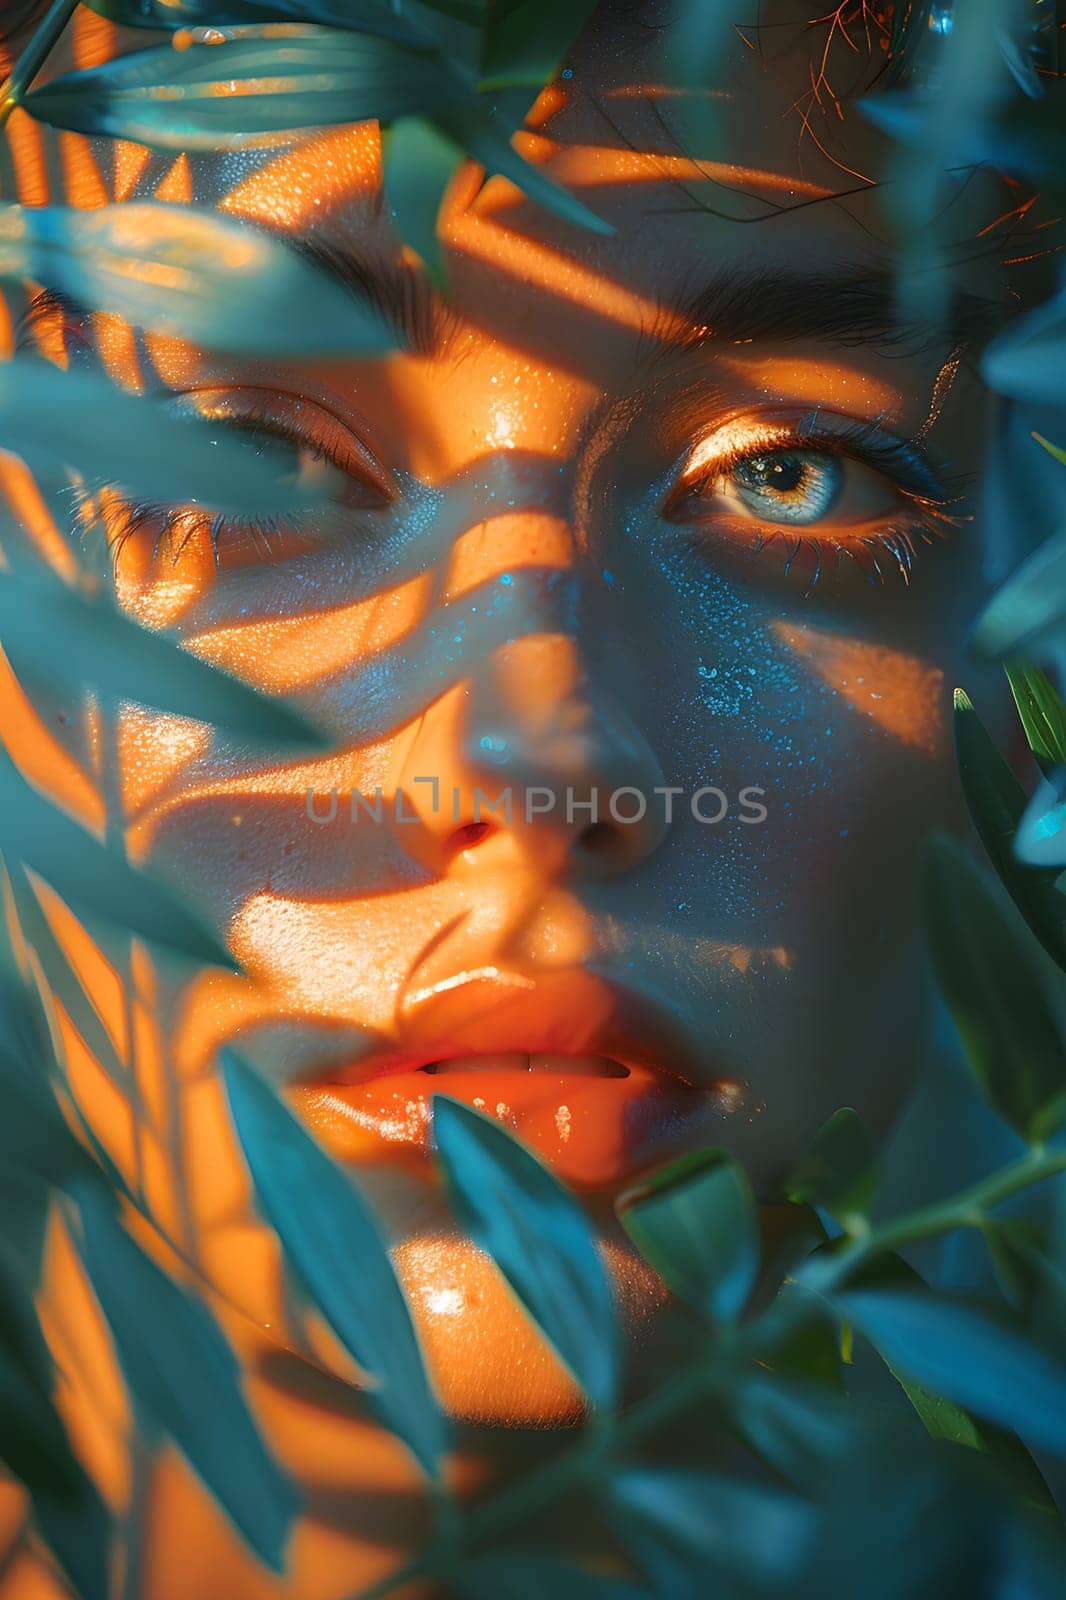 Closeup of a womans face with electric blue eyelashes, surrounded by leaves by Nadtochiy